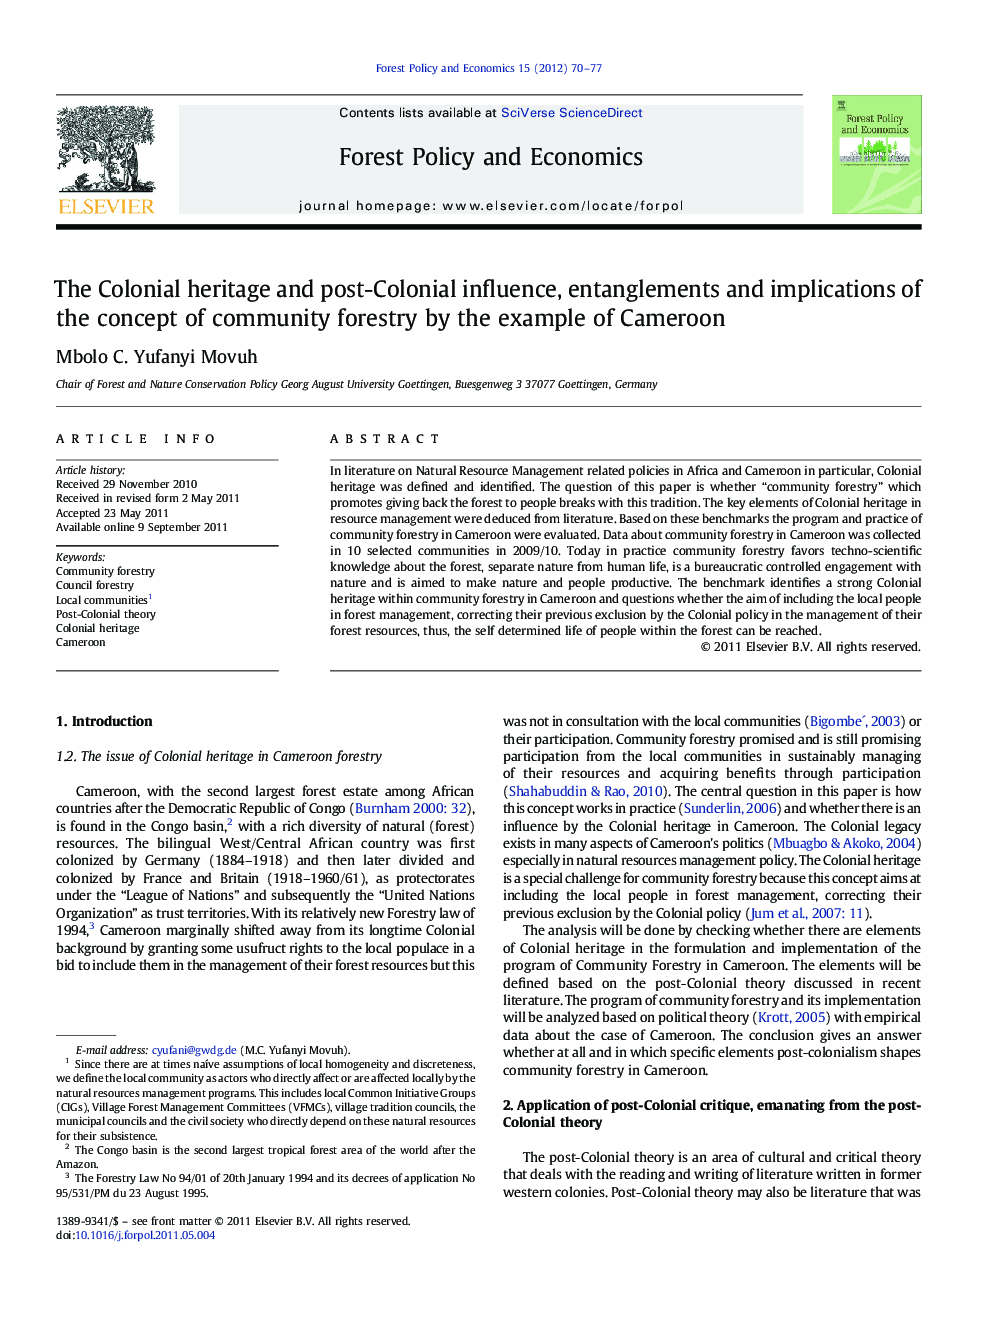 The Colonial heritage and post-Colonial influence, entanglements and implications of the concept of community forestry by the example of Cameroon